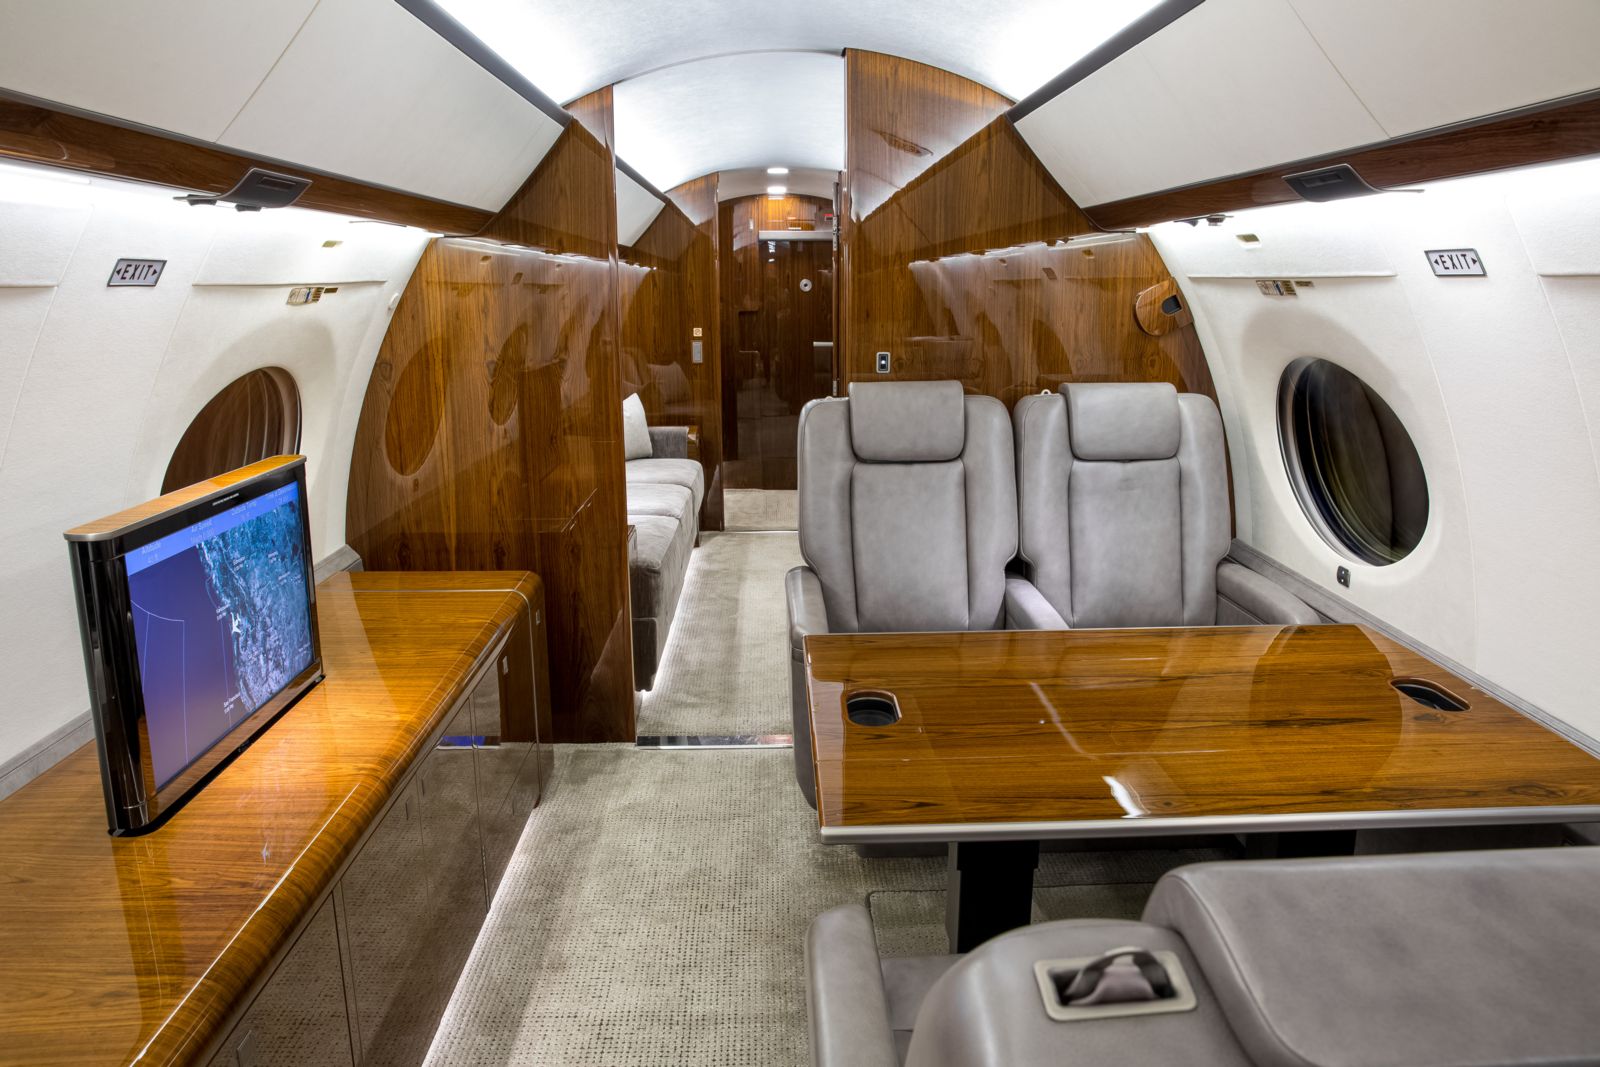 Gulfstream G650  S/N 6003 for sale | gallery image: /userfiles/images/G650_sn6003/bfp_2638.jpg